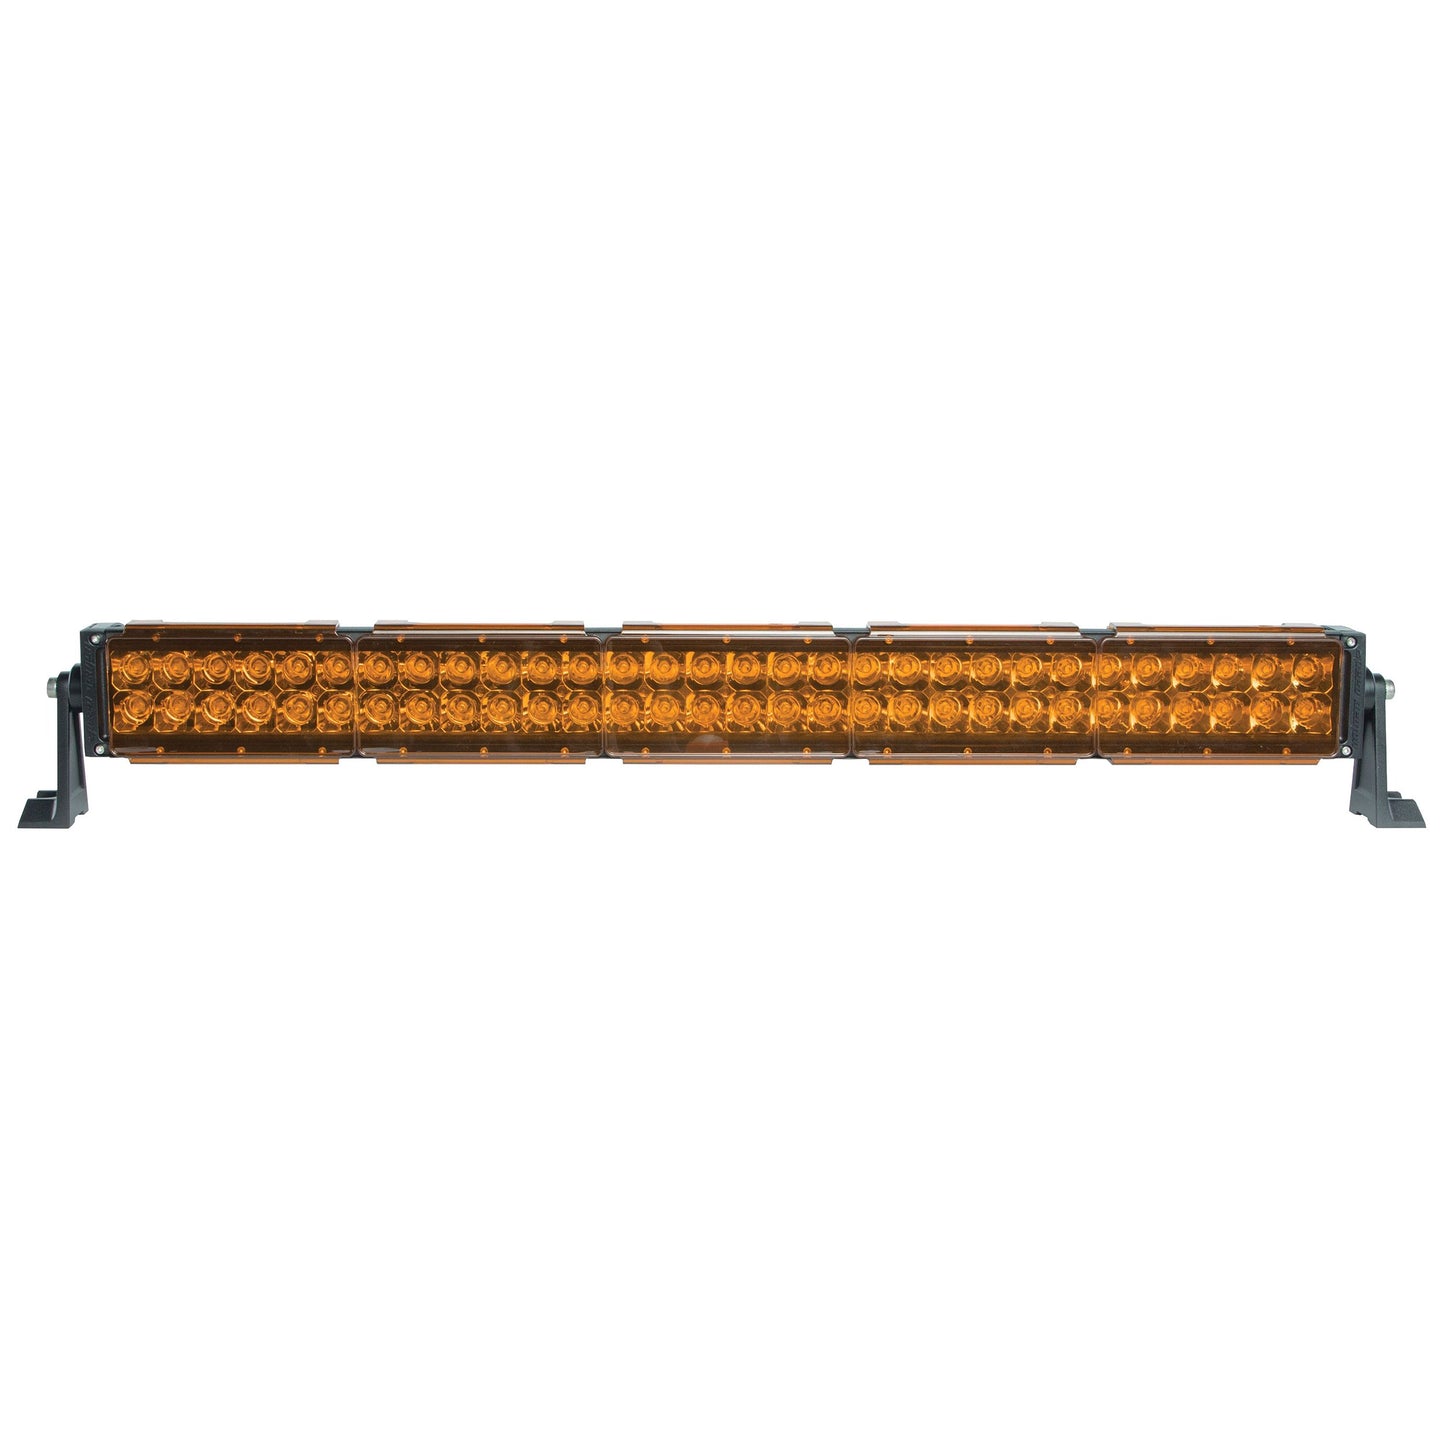 Light Covers for Dual Row DRC, DRCX and Infinity LED Light Bars - 30" 10-30010/10-30016